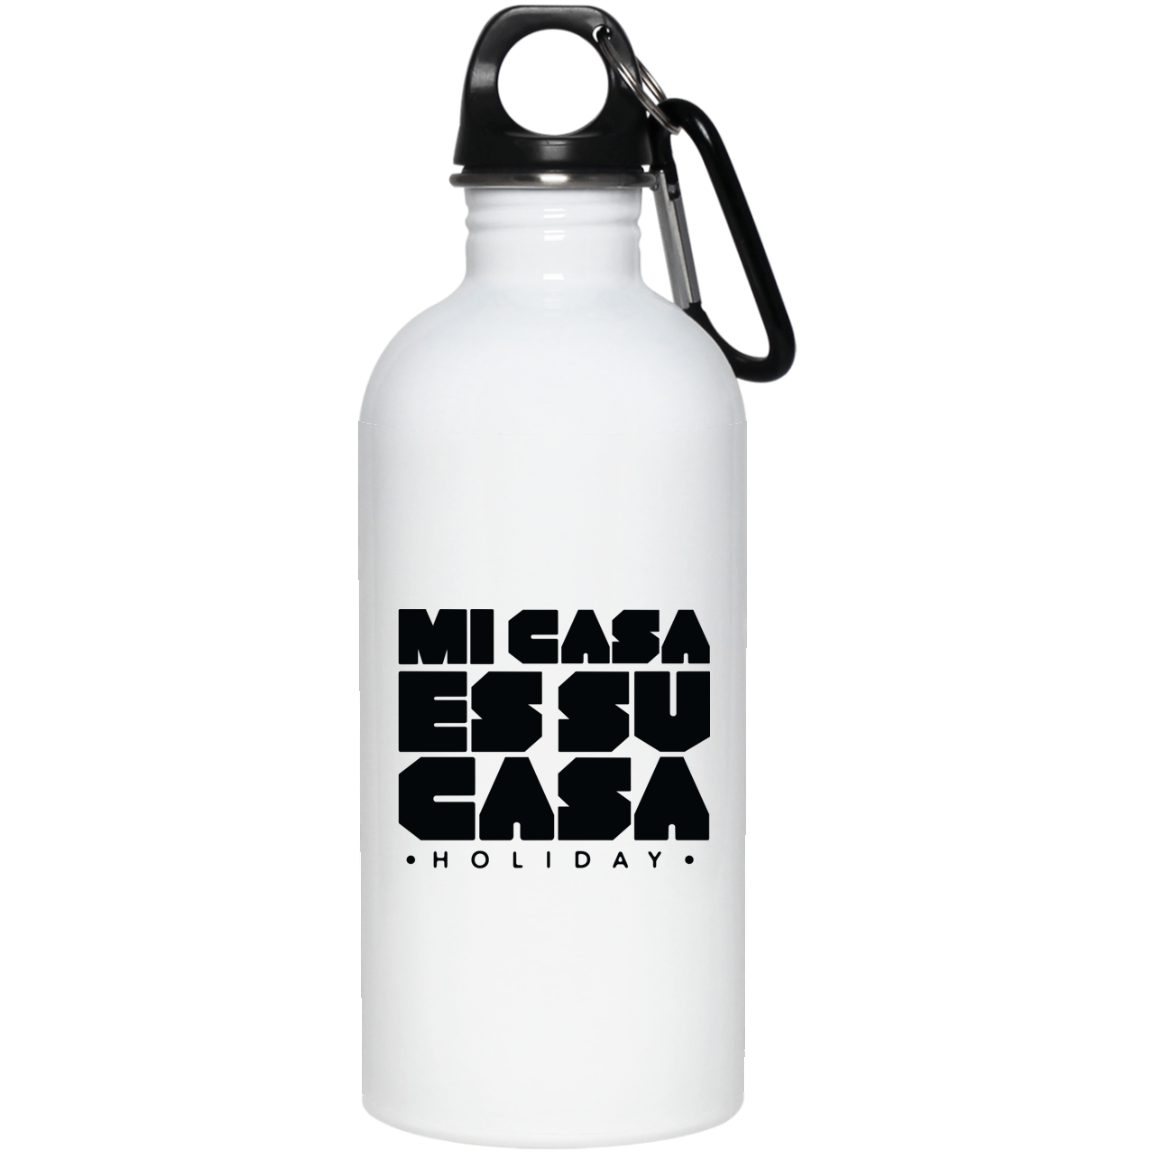 Classic Mi Casa Holiday 20 oz. Stainless Steel Water Bottle